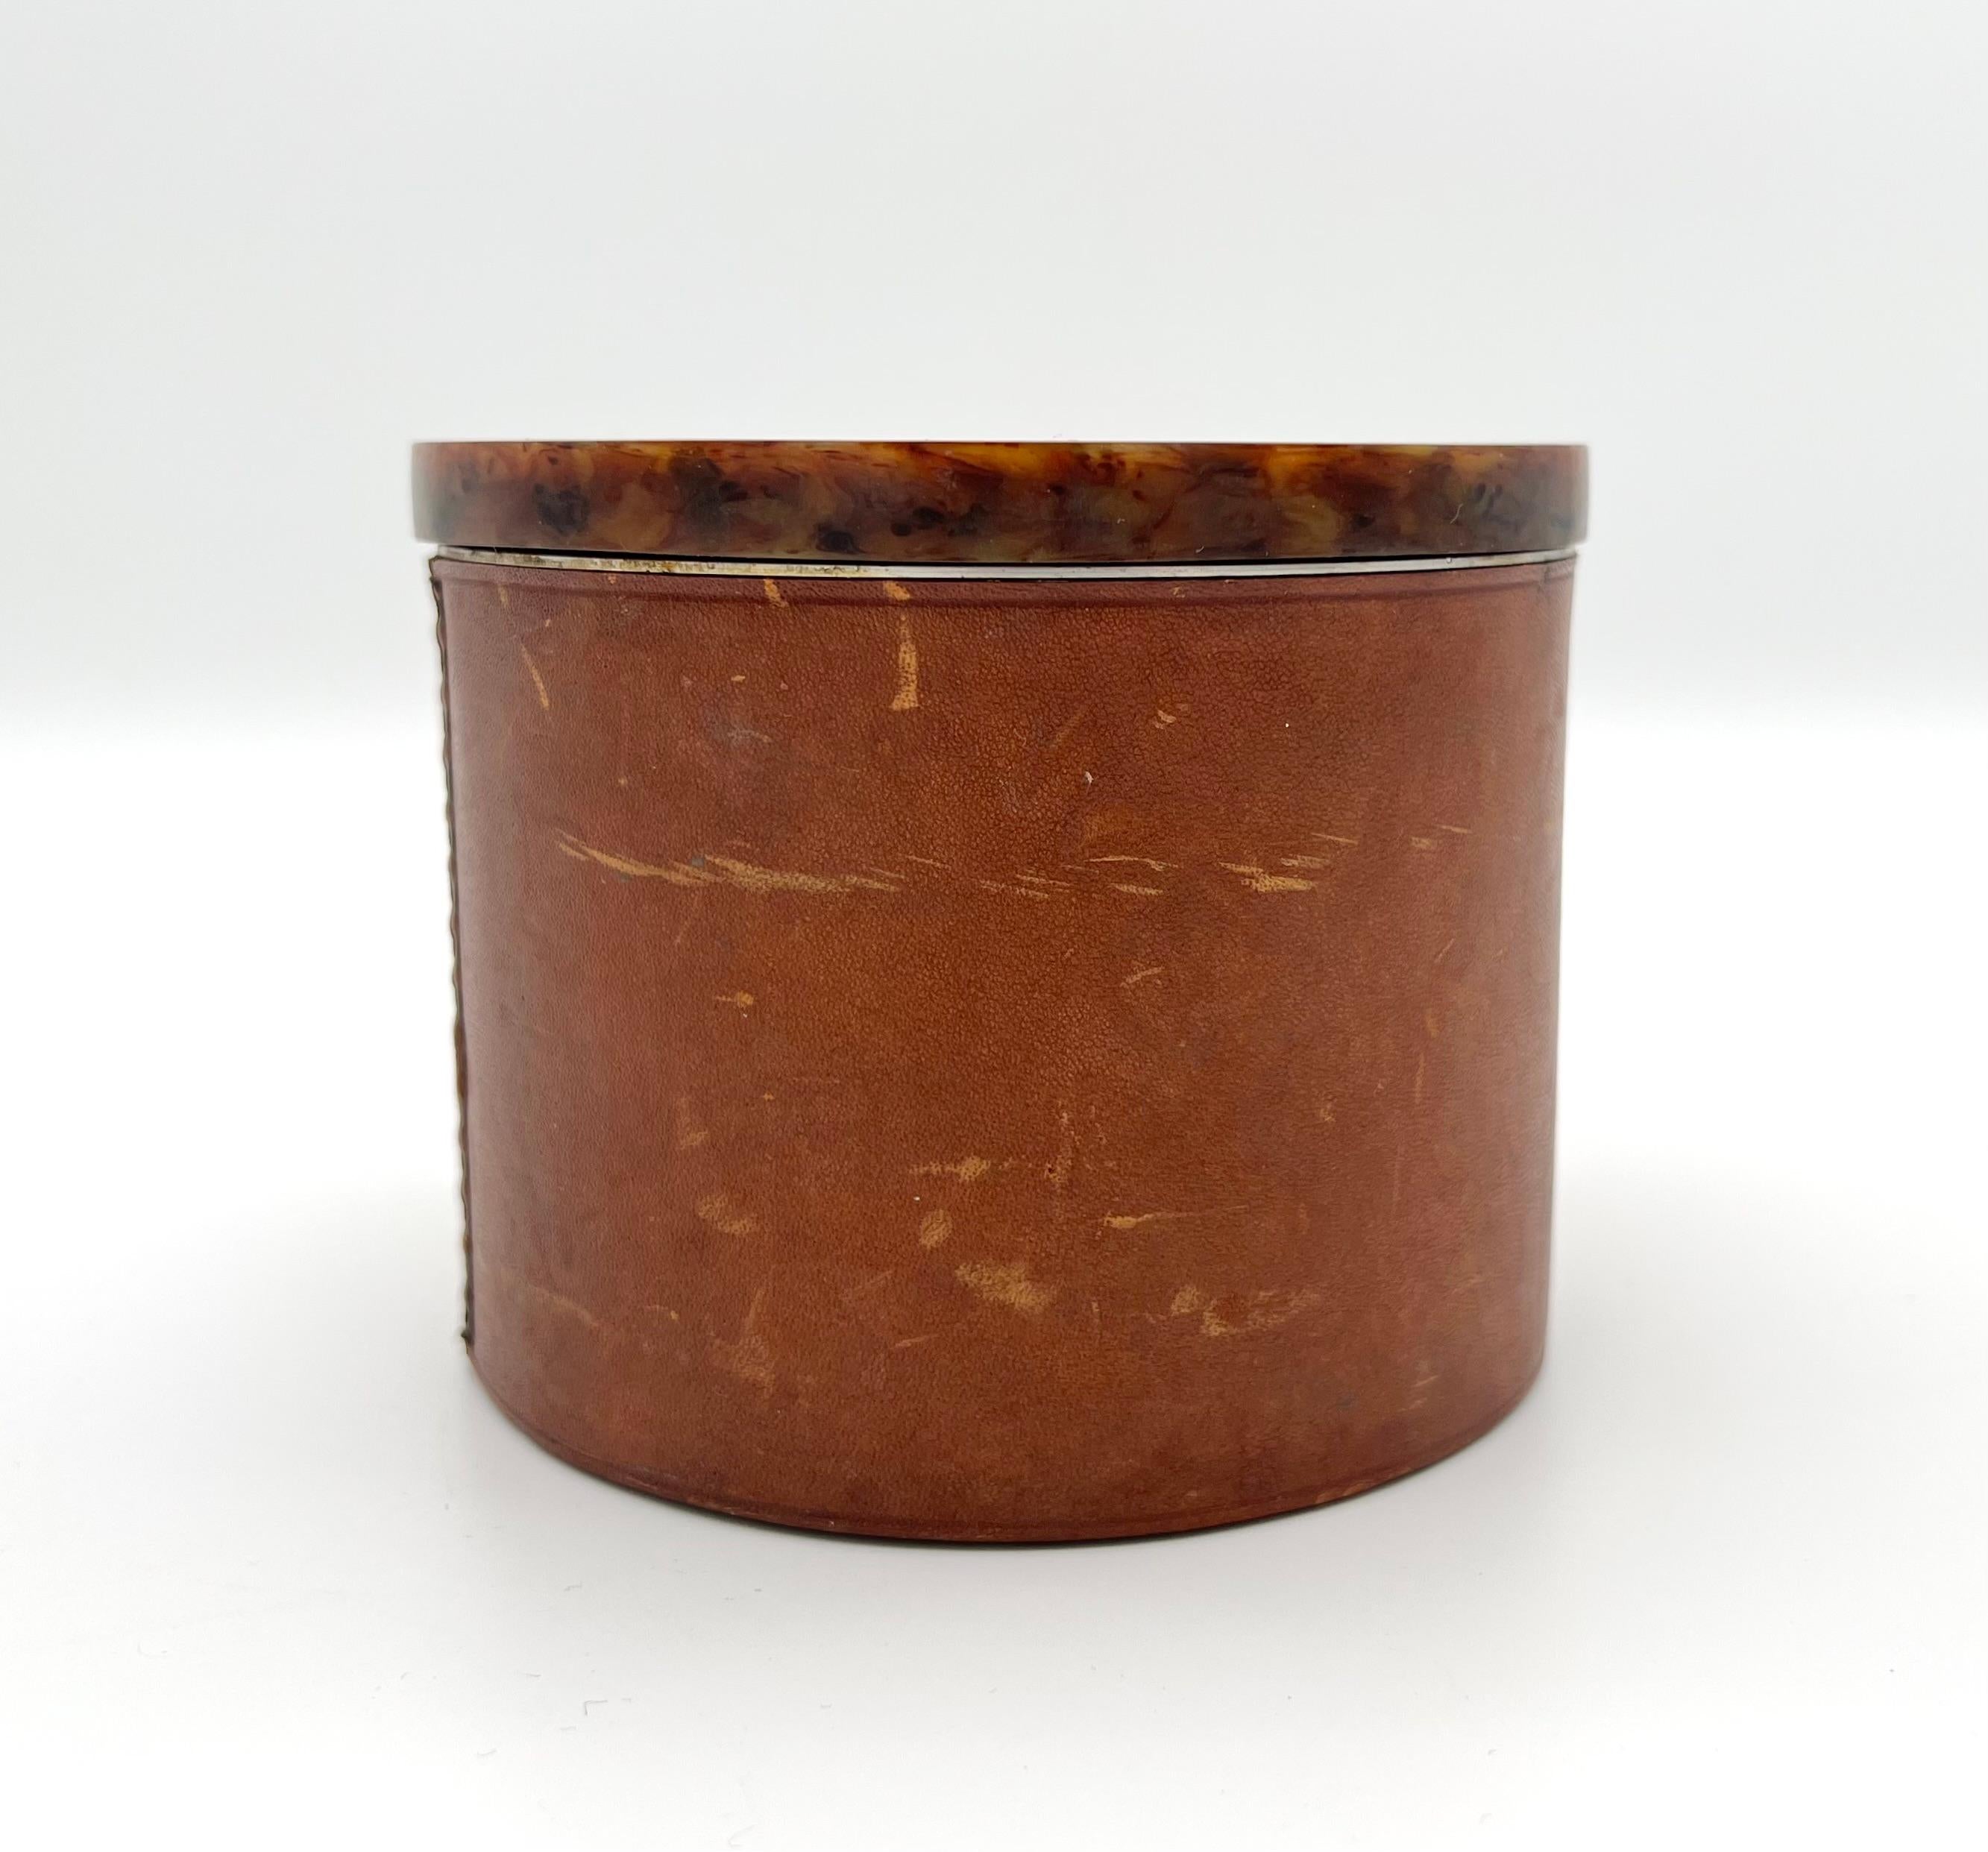 Aubock tobacco box, 1950s
Made of aluminum, with a leather wrapp sleeve and a bakelite lid.

Listed in the catalog 